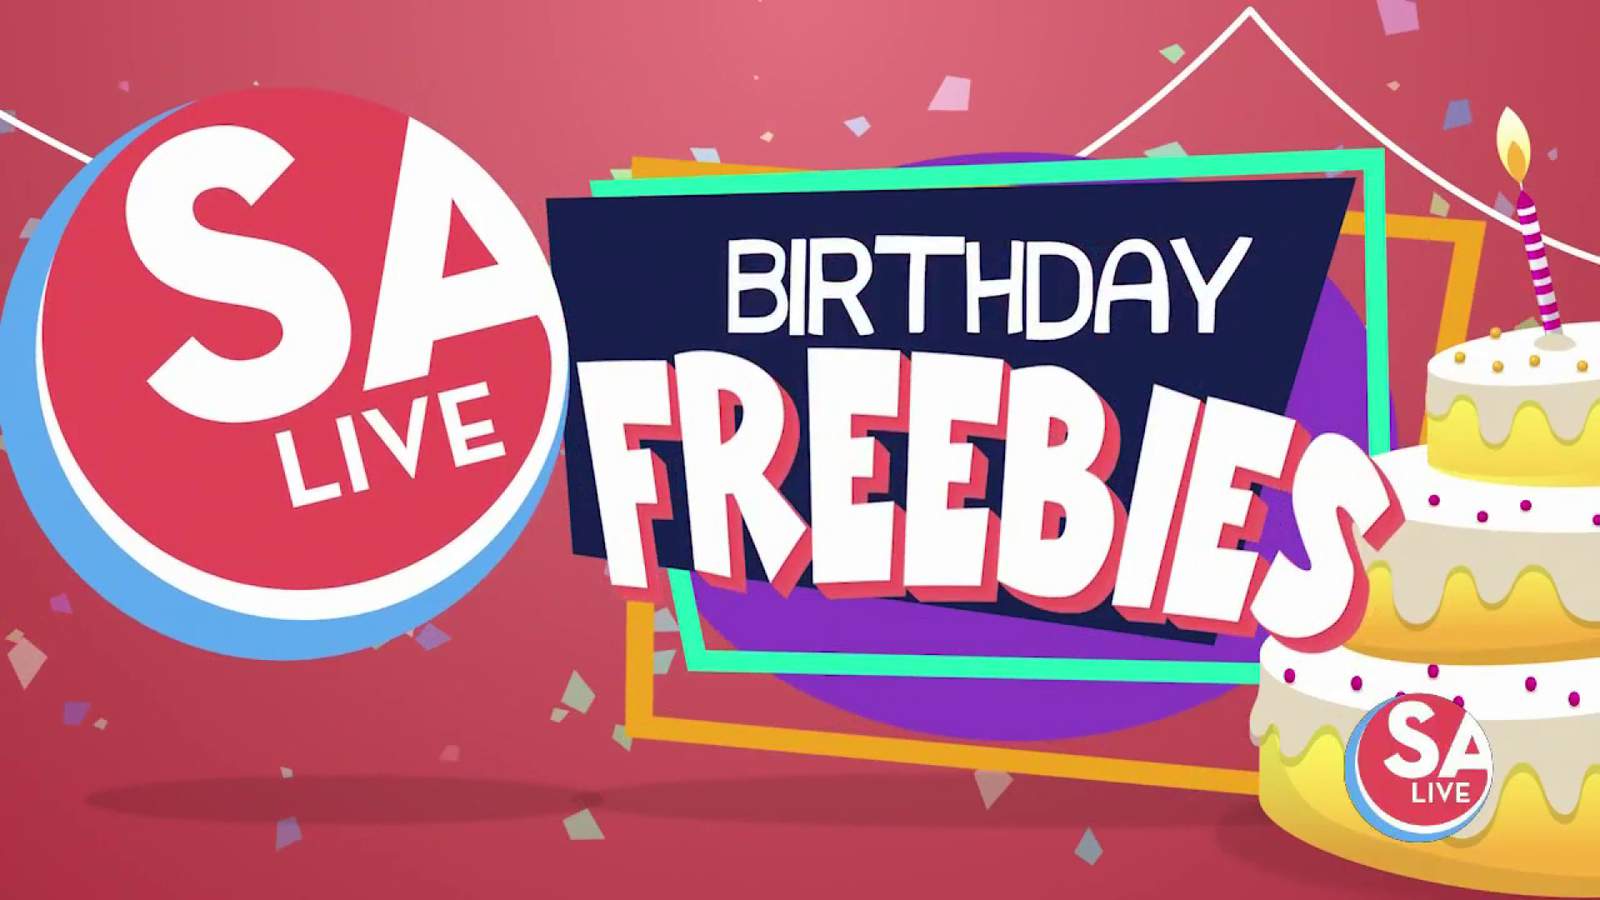 5 birthday freebies for those born in March